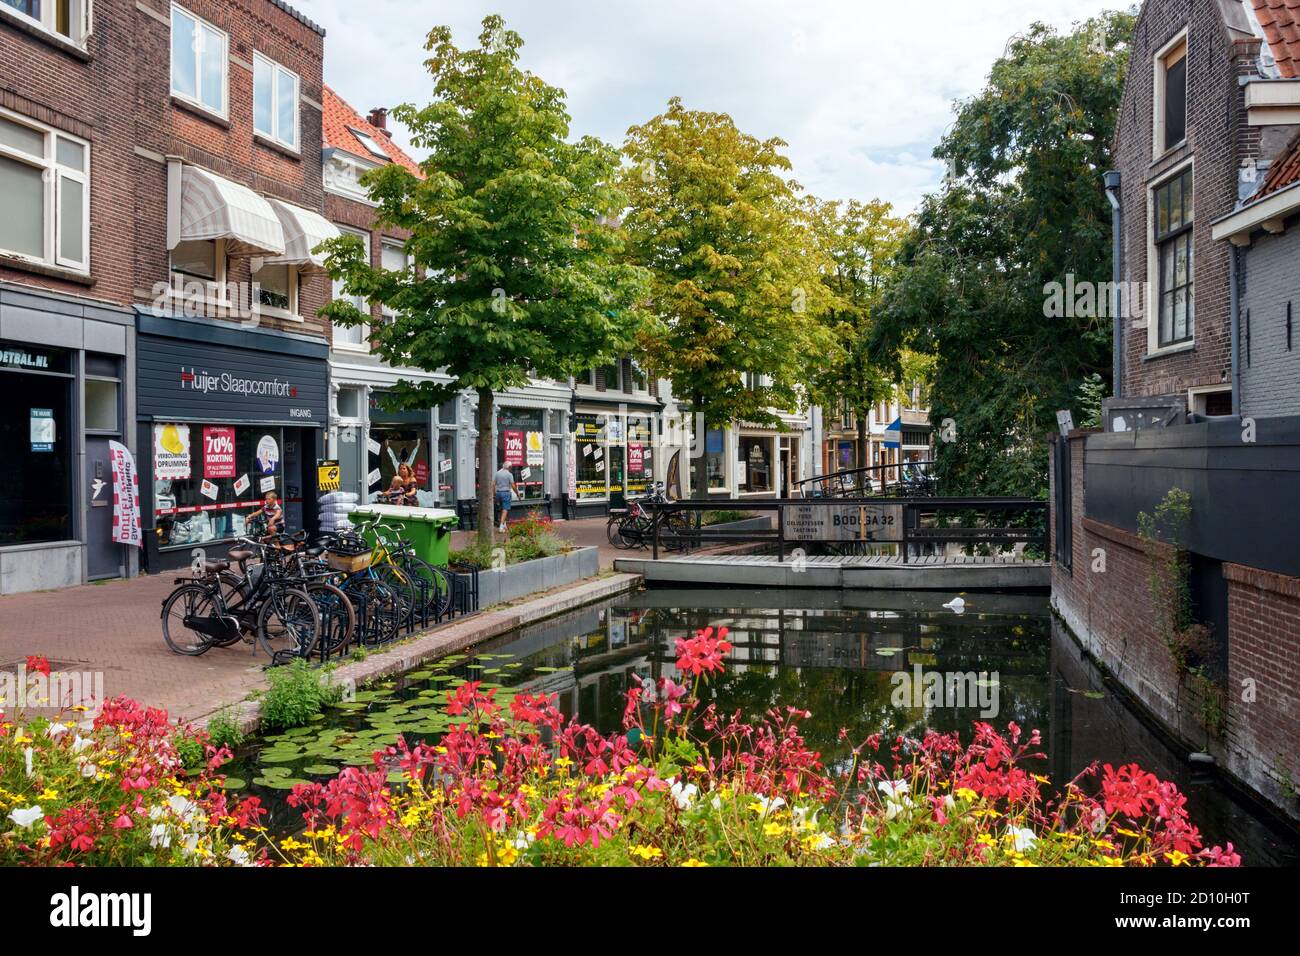 View of the Gouda old city centre. Zeugstraat with canal, various shops and blooming flowers on a sunny afternoon. South Holland, The Netherlands. Stock Photo